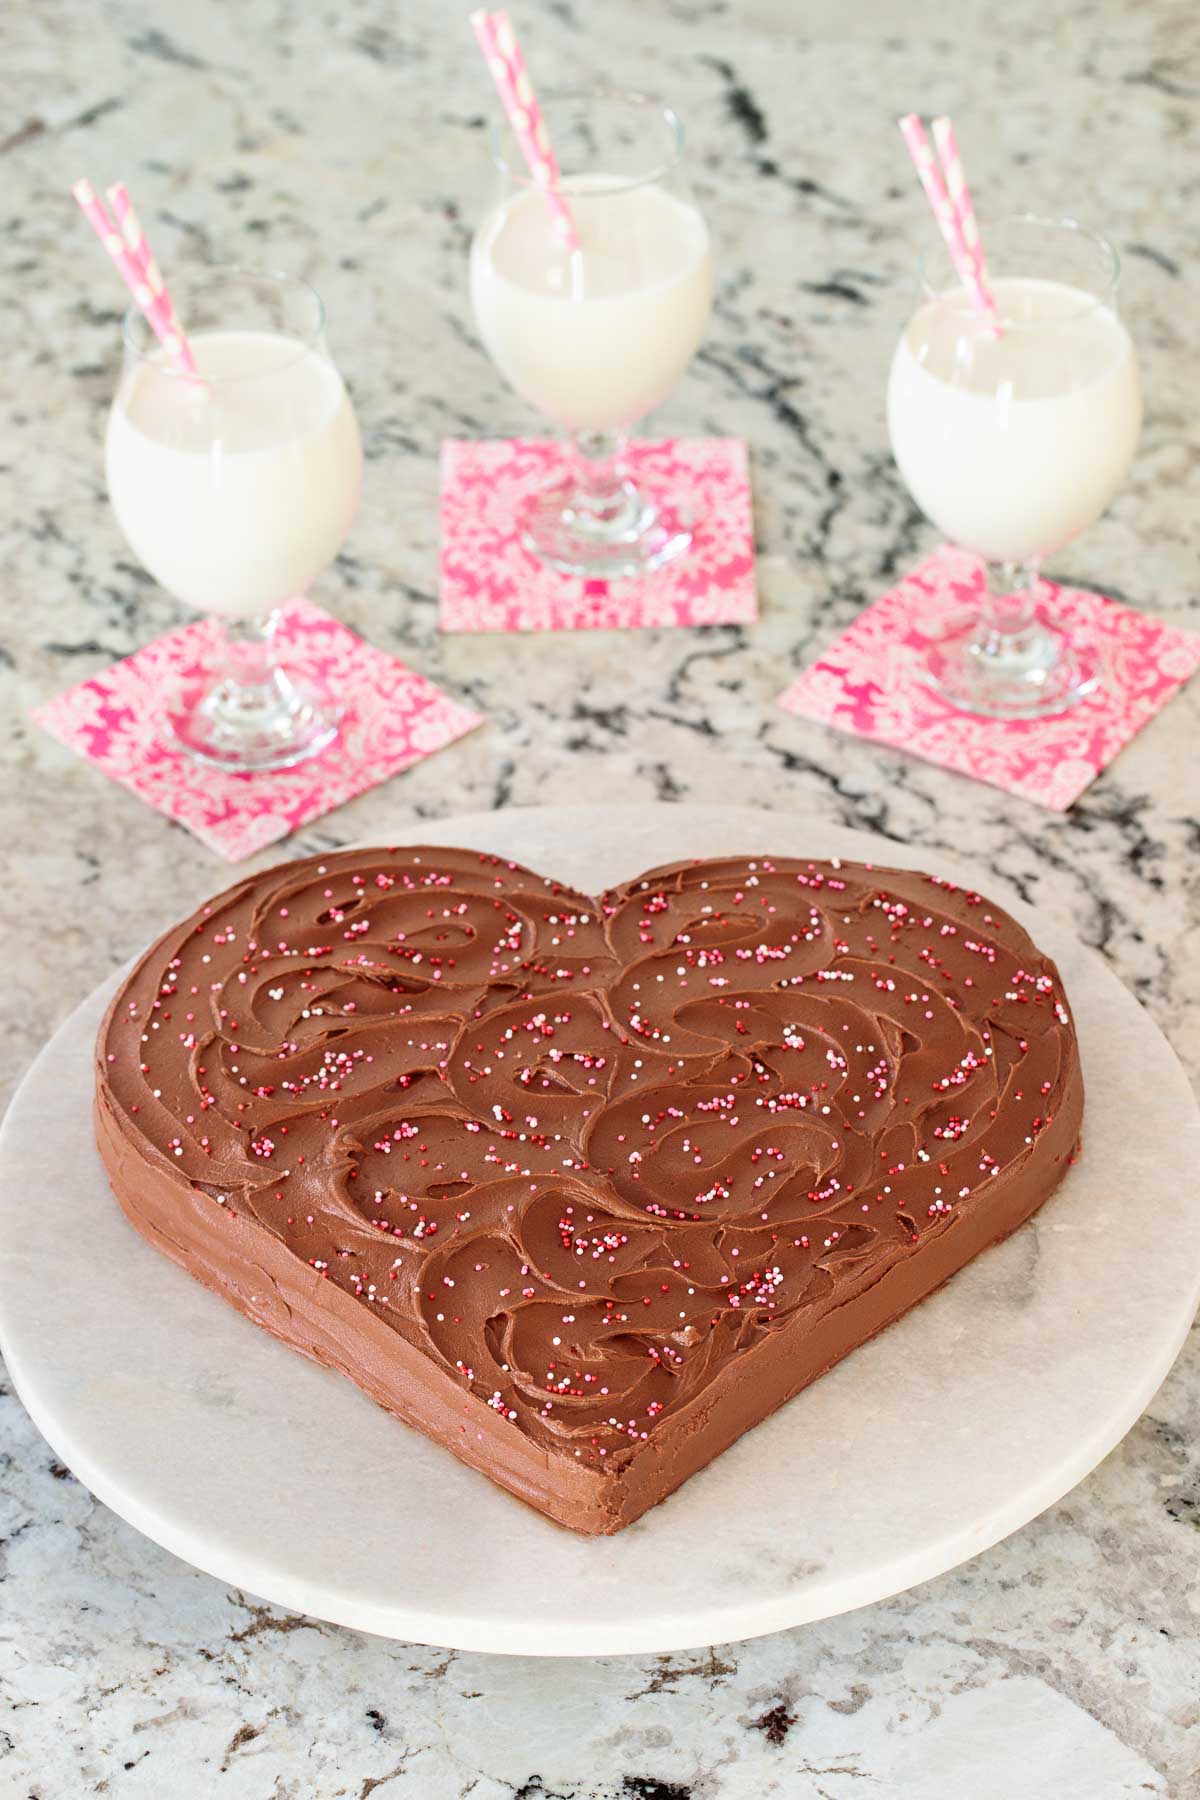 Vertical photo of a Ridiculously Easy One-Bowl Chocolate Heart Cake on a white granite countertop with three glasses of milk in the background.